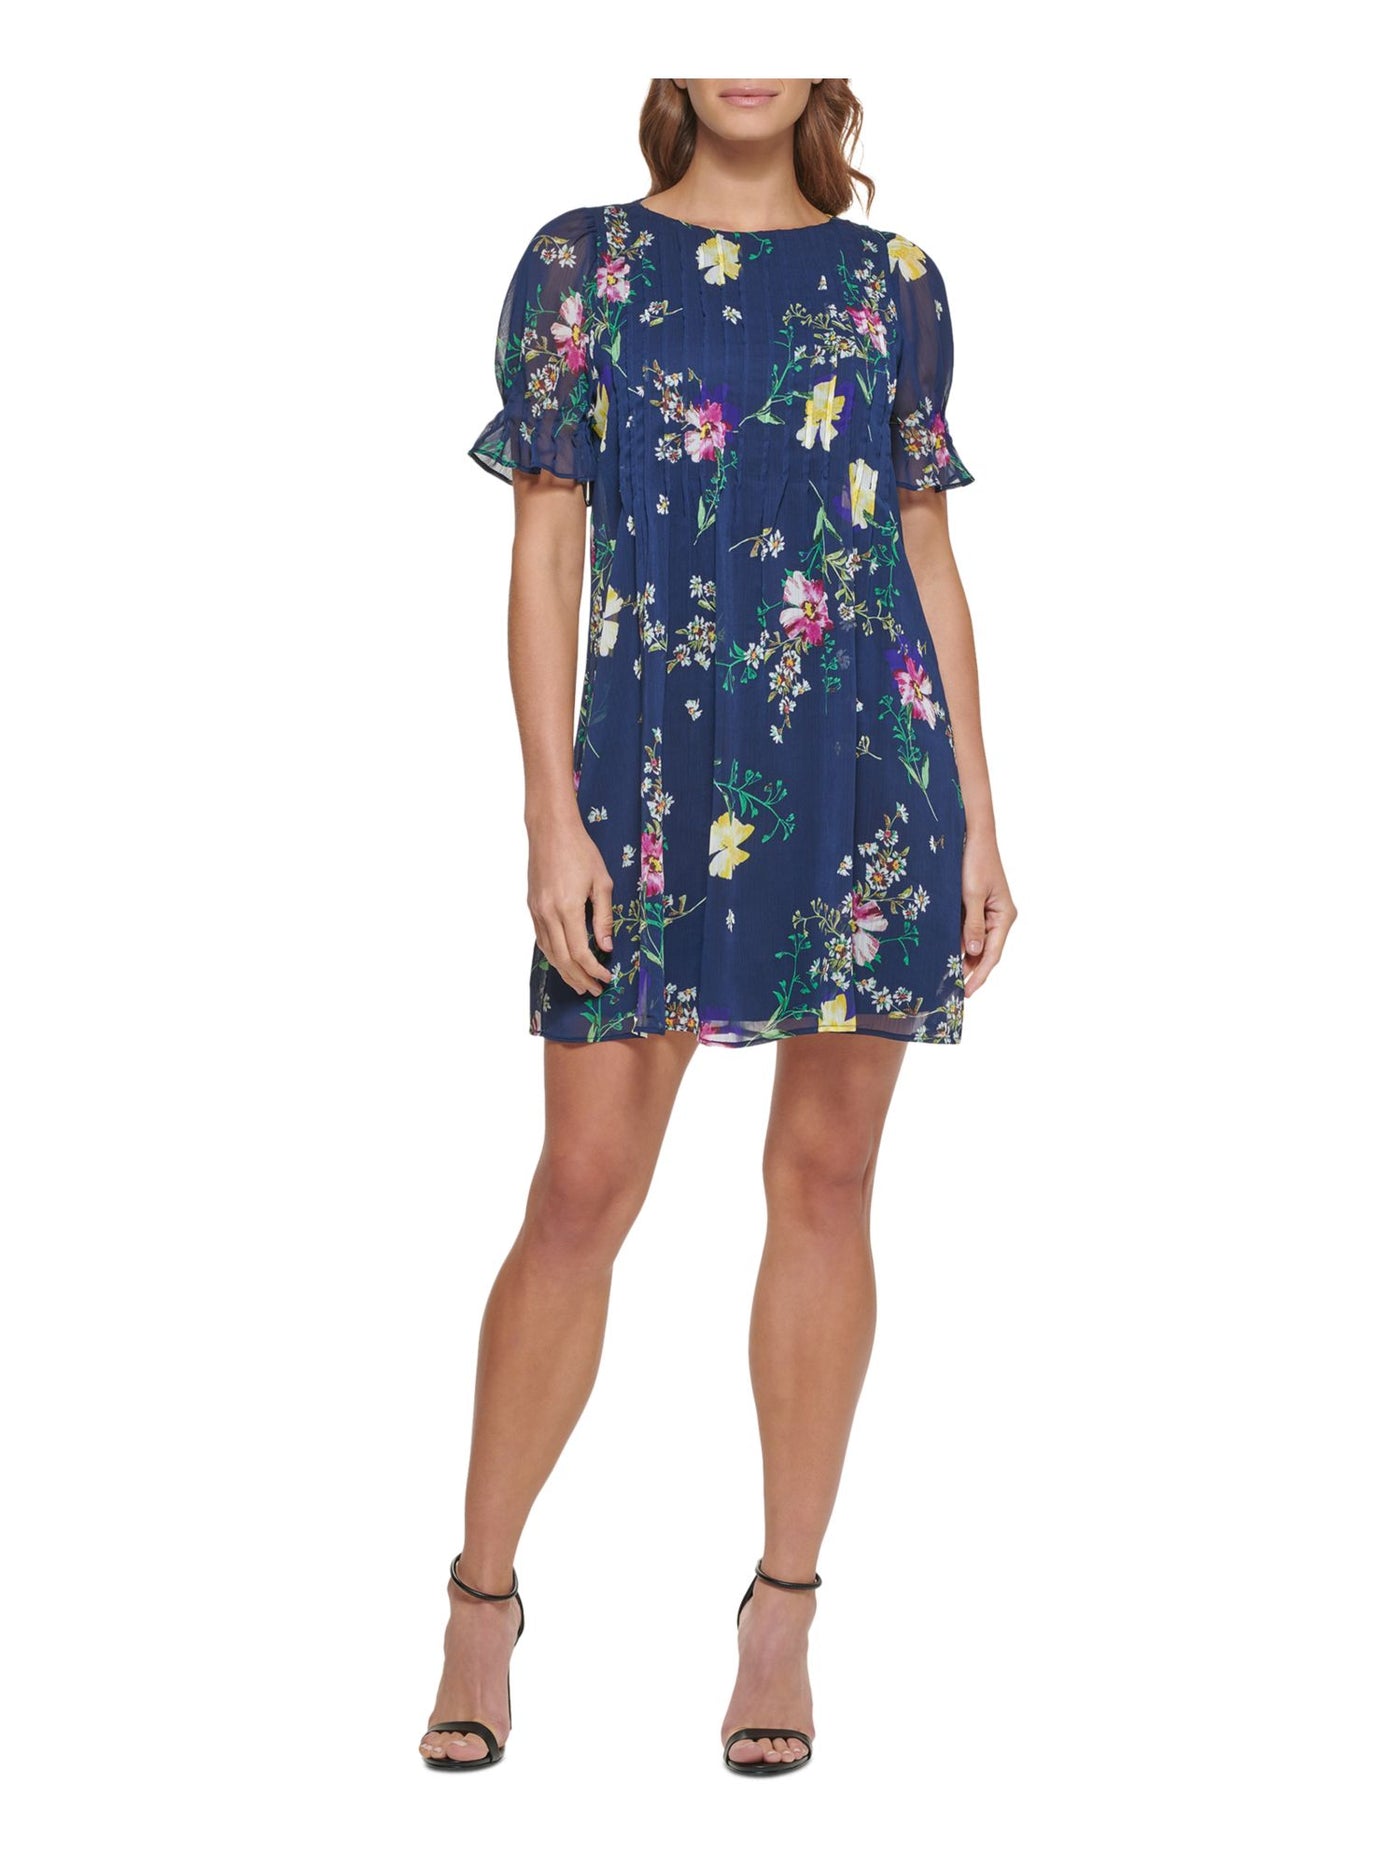 DKNY Womens Navy Sheer Lined Pintucked Front Keyhole Back Floral Short Sleeve Round Neck Short Shift Dress 4